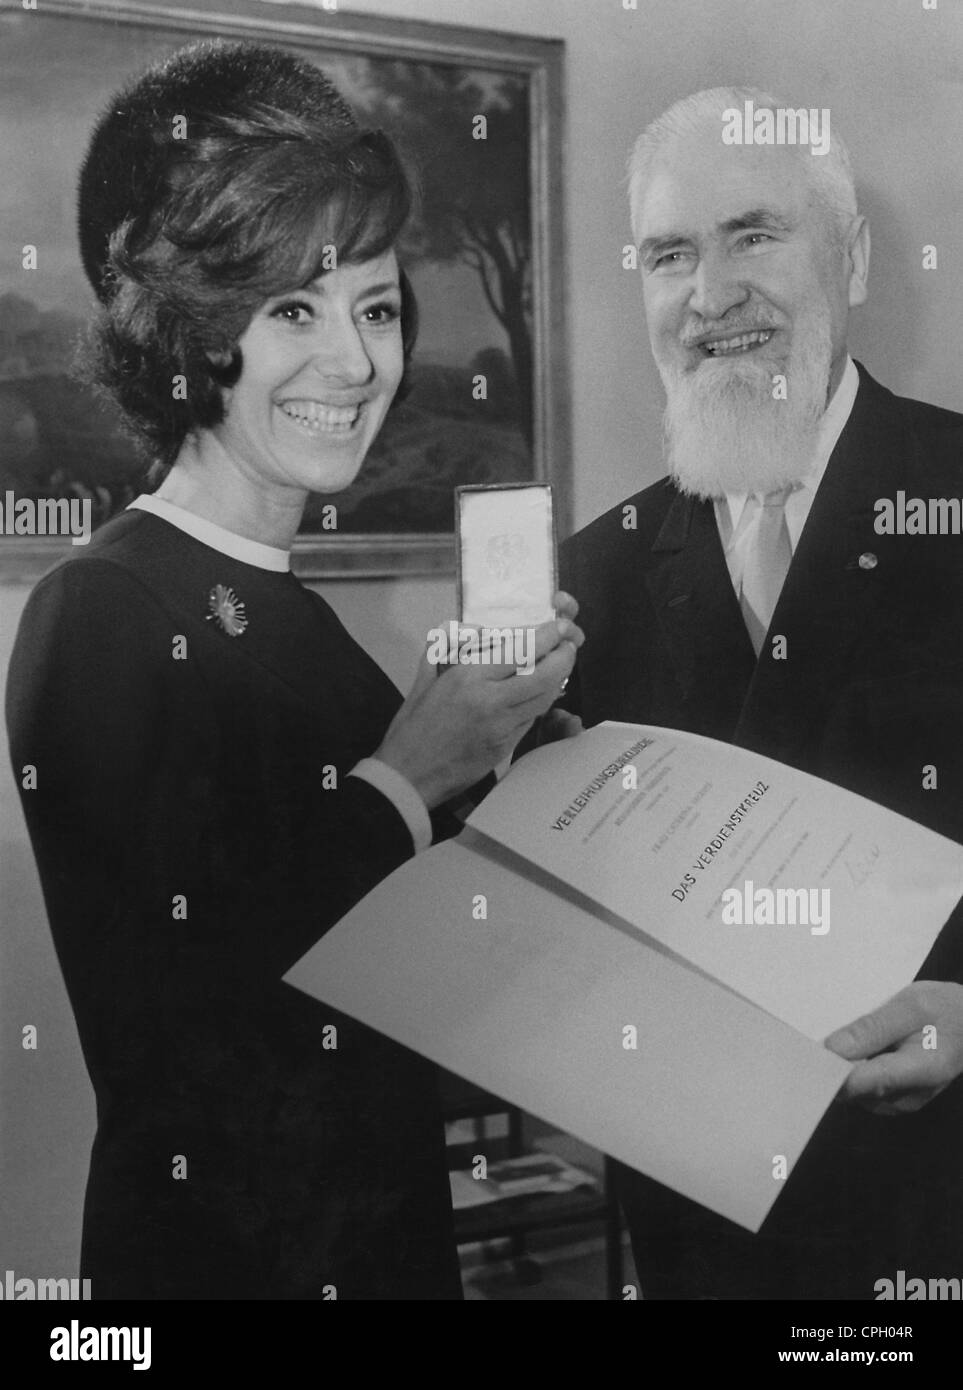 Valente, Caterina, * 14.1.1931, Italian singer, dancer and actress, receiving the Bavarian Order of Merit, Munich, 21.1.1968, with Deputy Prime Minister Alois Hundhammer, , Stock Photo